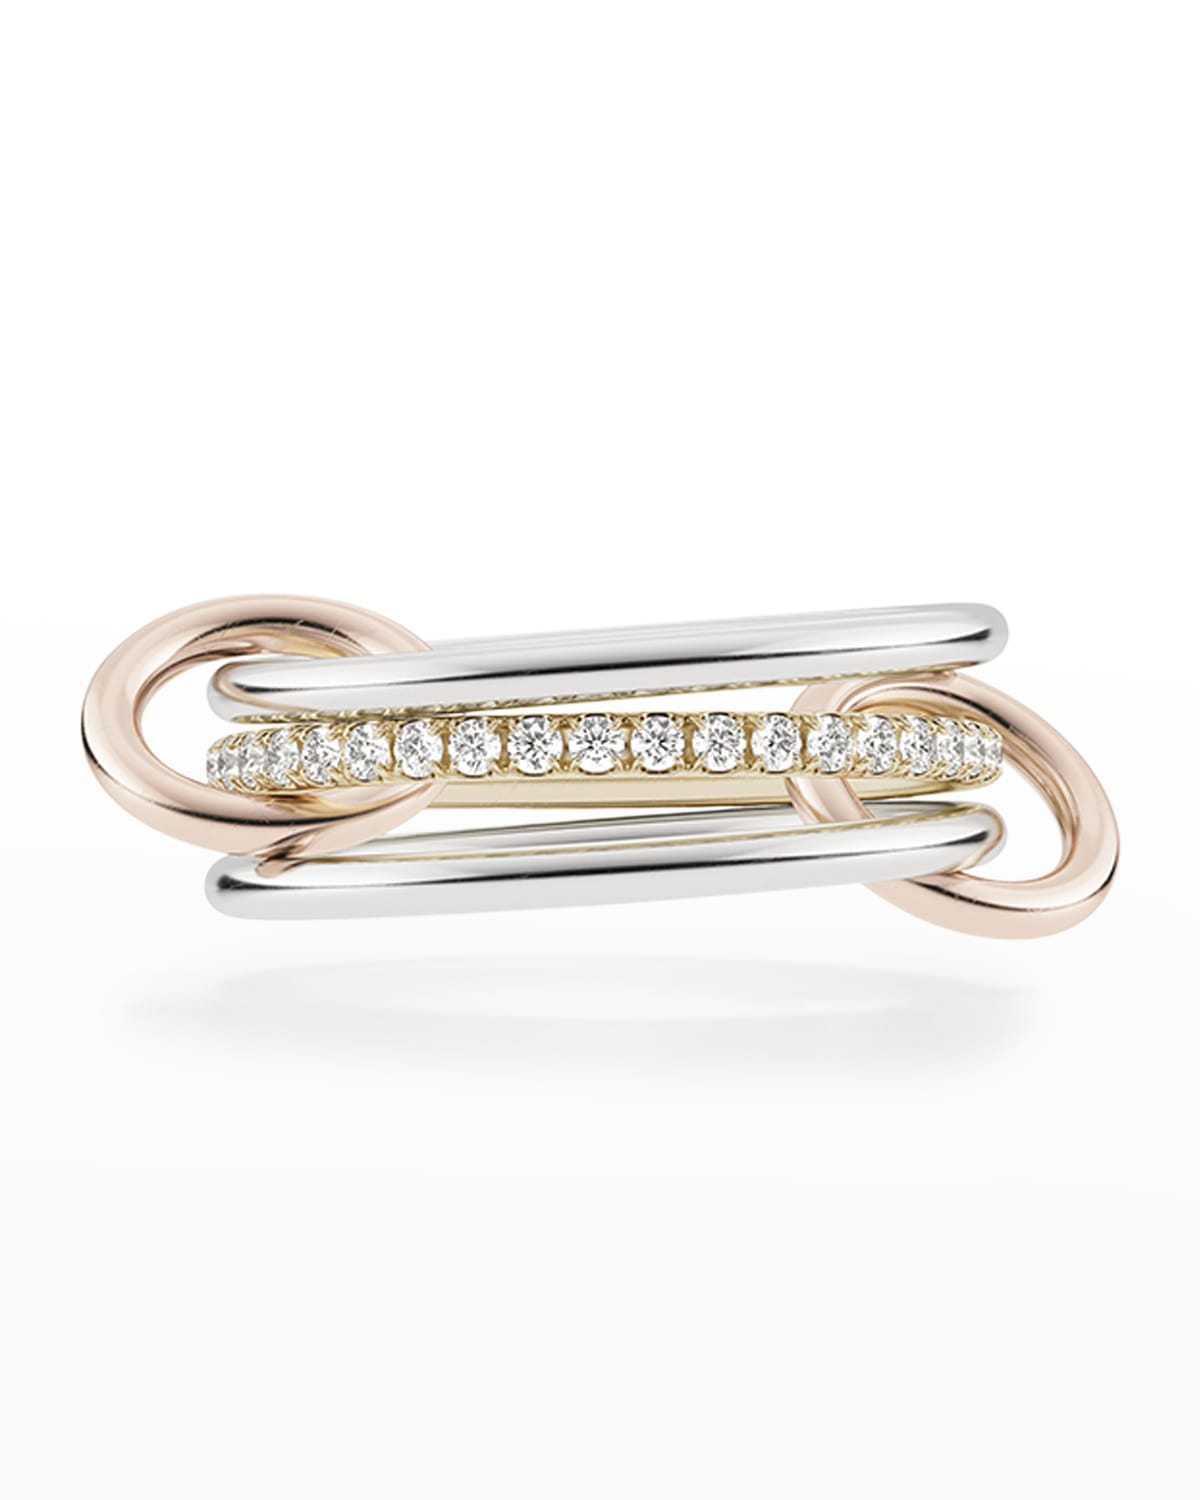 SPINELLI KILCOLLIN YELLOW GOLD AND WHITE GOLD 3-LINKED RING WITH PAVE WHITE DIAMONDS